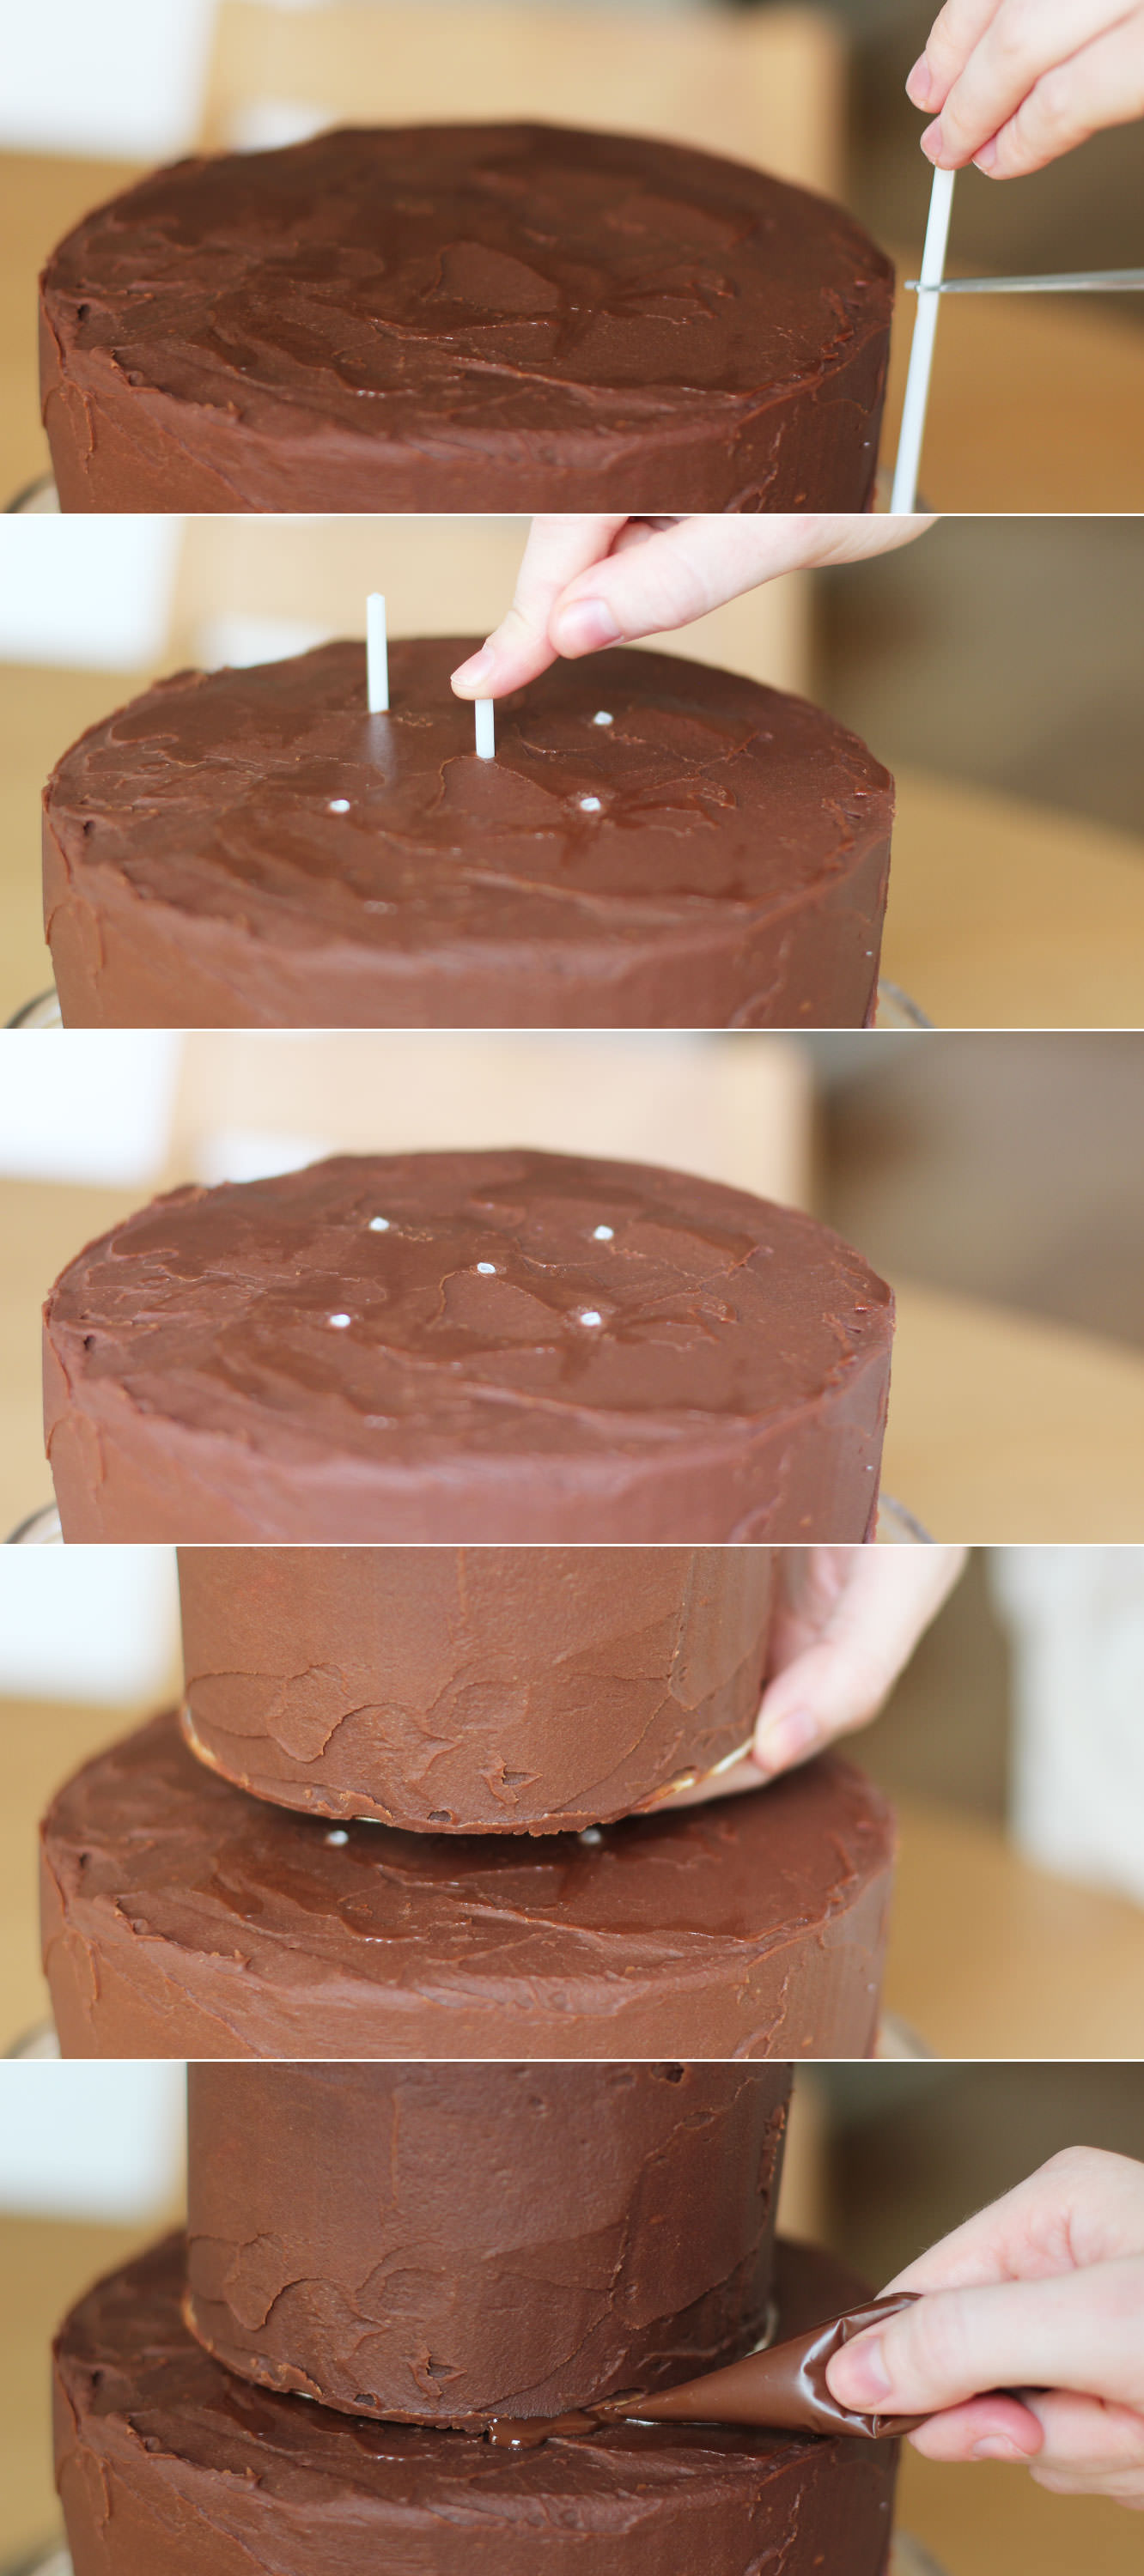 chocolate-salted-caramel-two-tier-occasion-cake-recipe-15